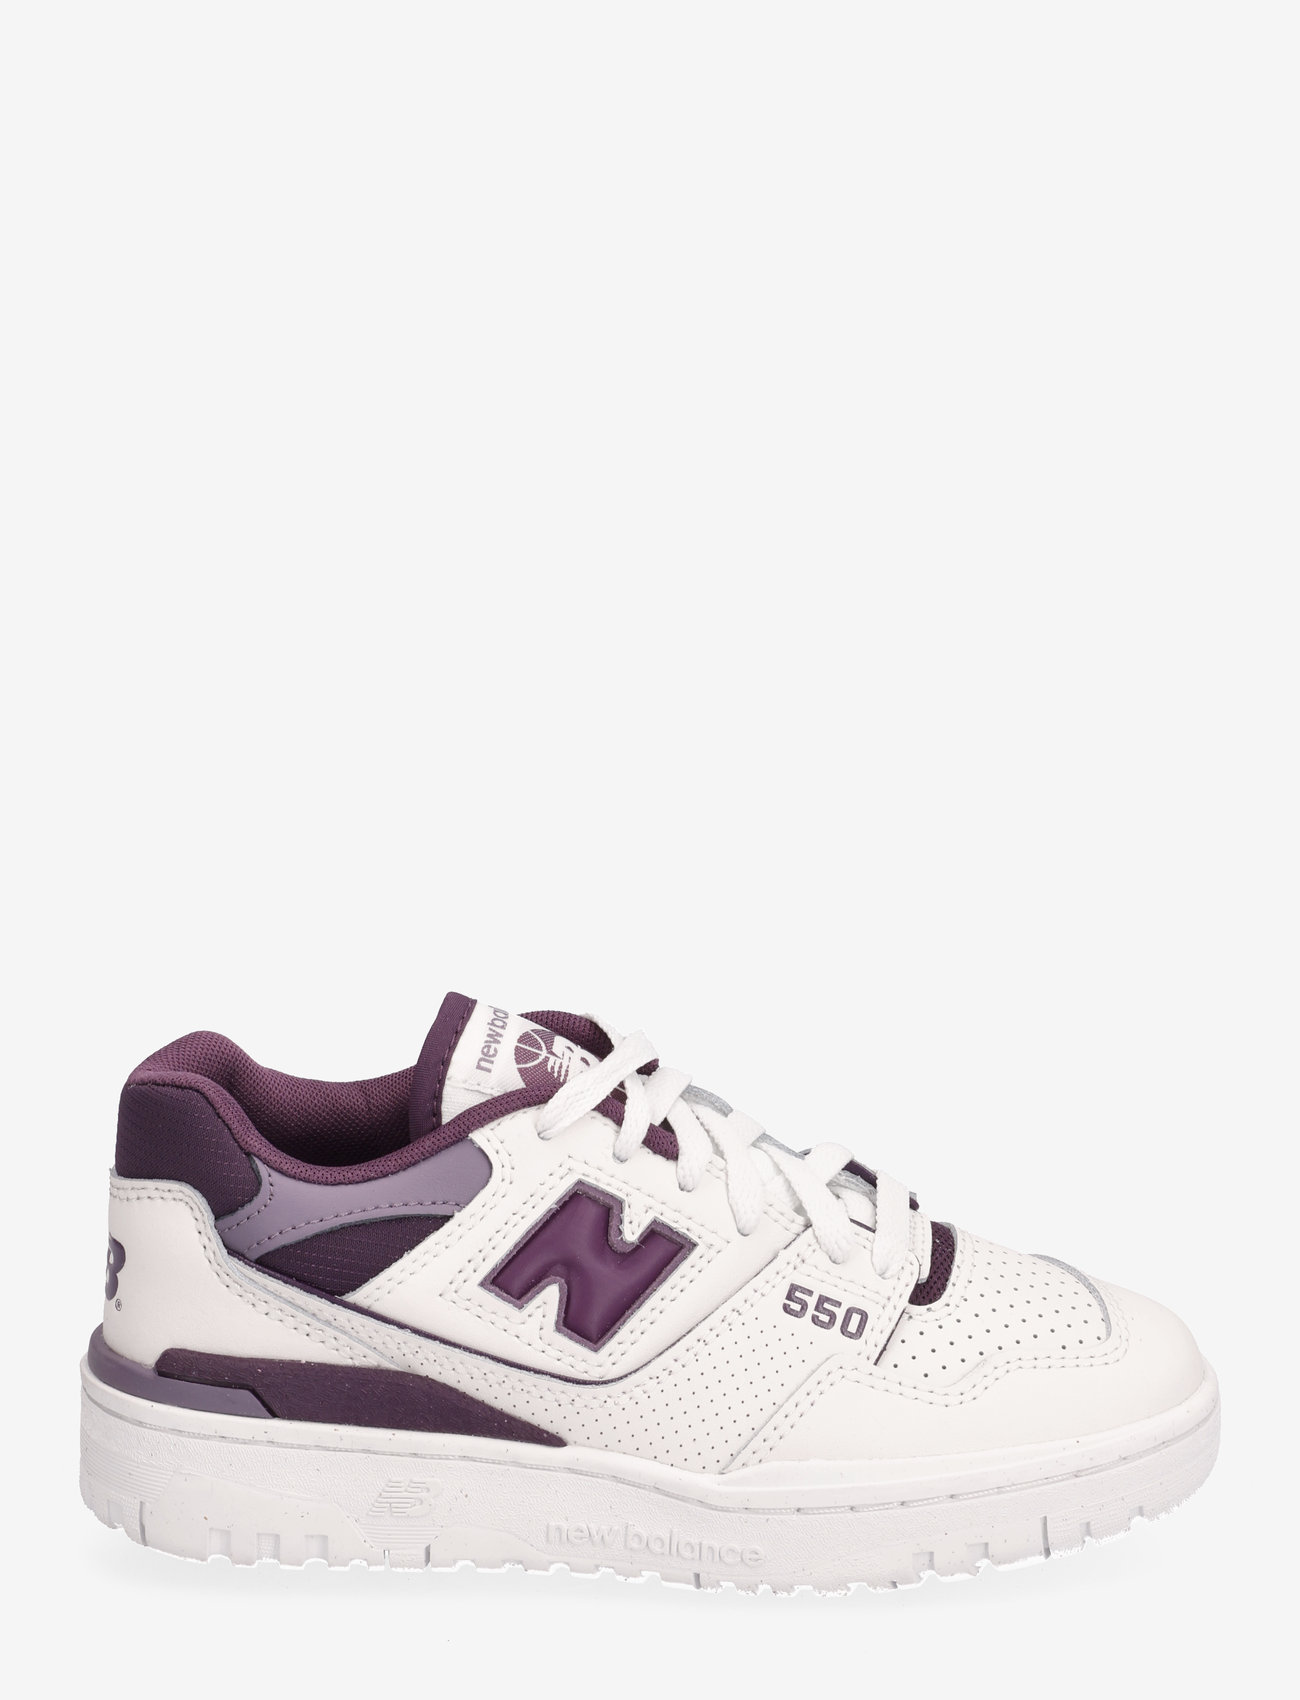 New Balance - New Balance BBW550 - lave sneakers - reflection - 1